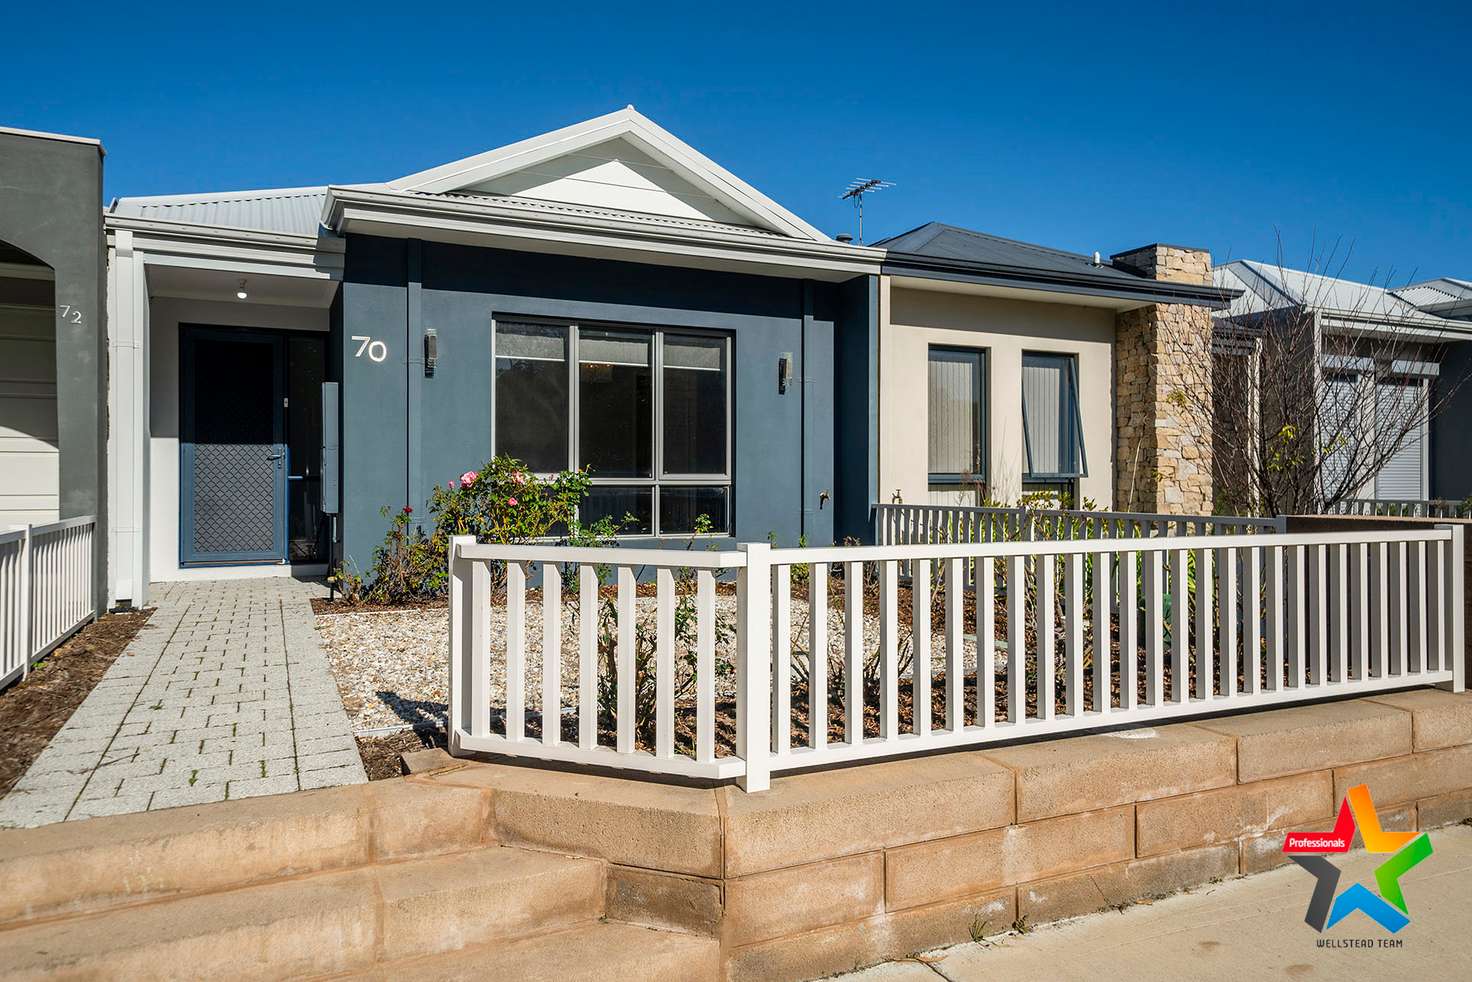 Main view of Homely house listing, 70 Wilding Boulevard, Ellenbrook WA 6069